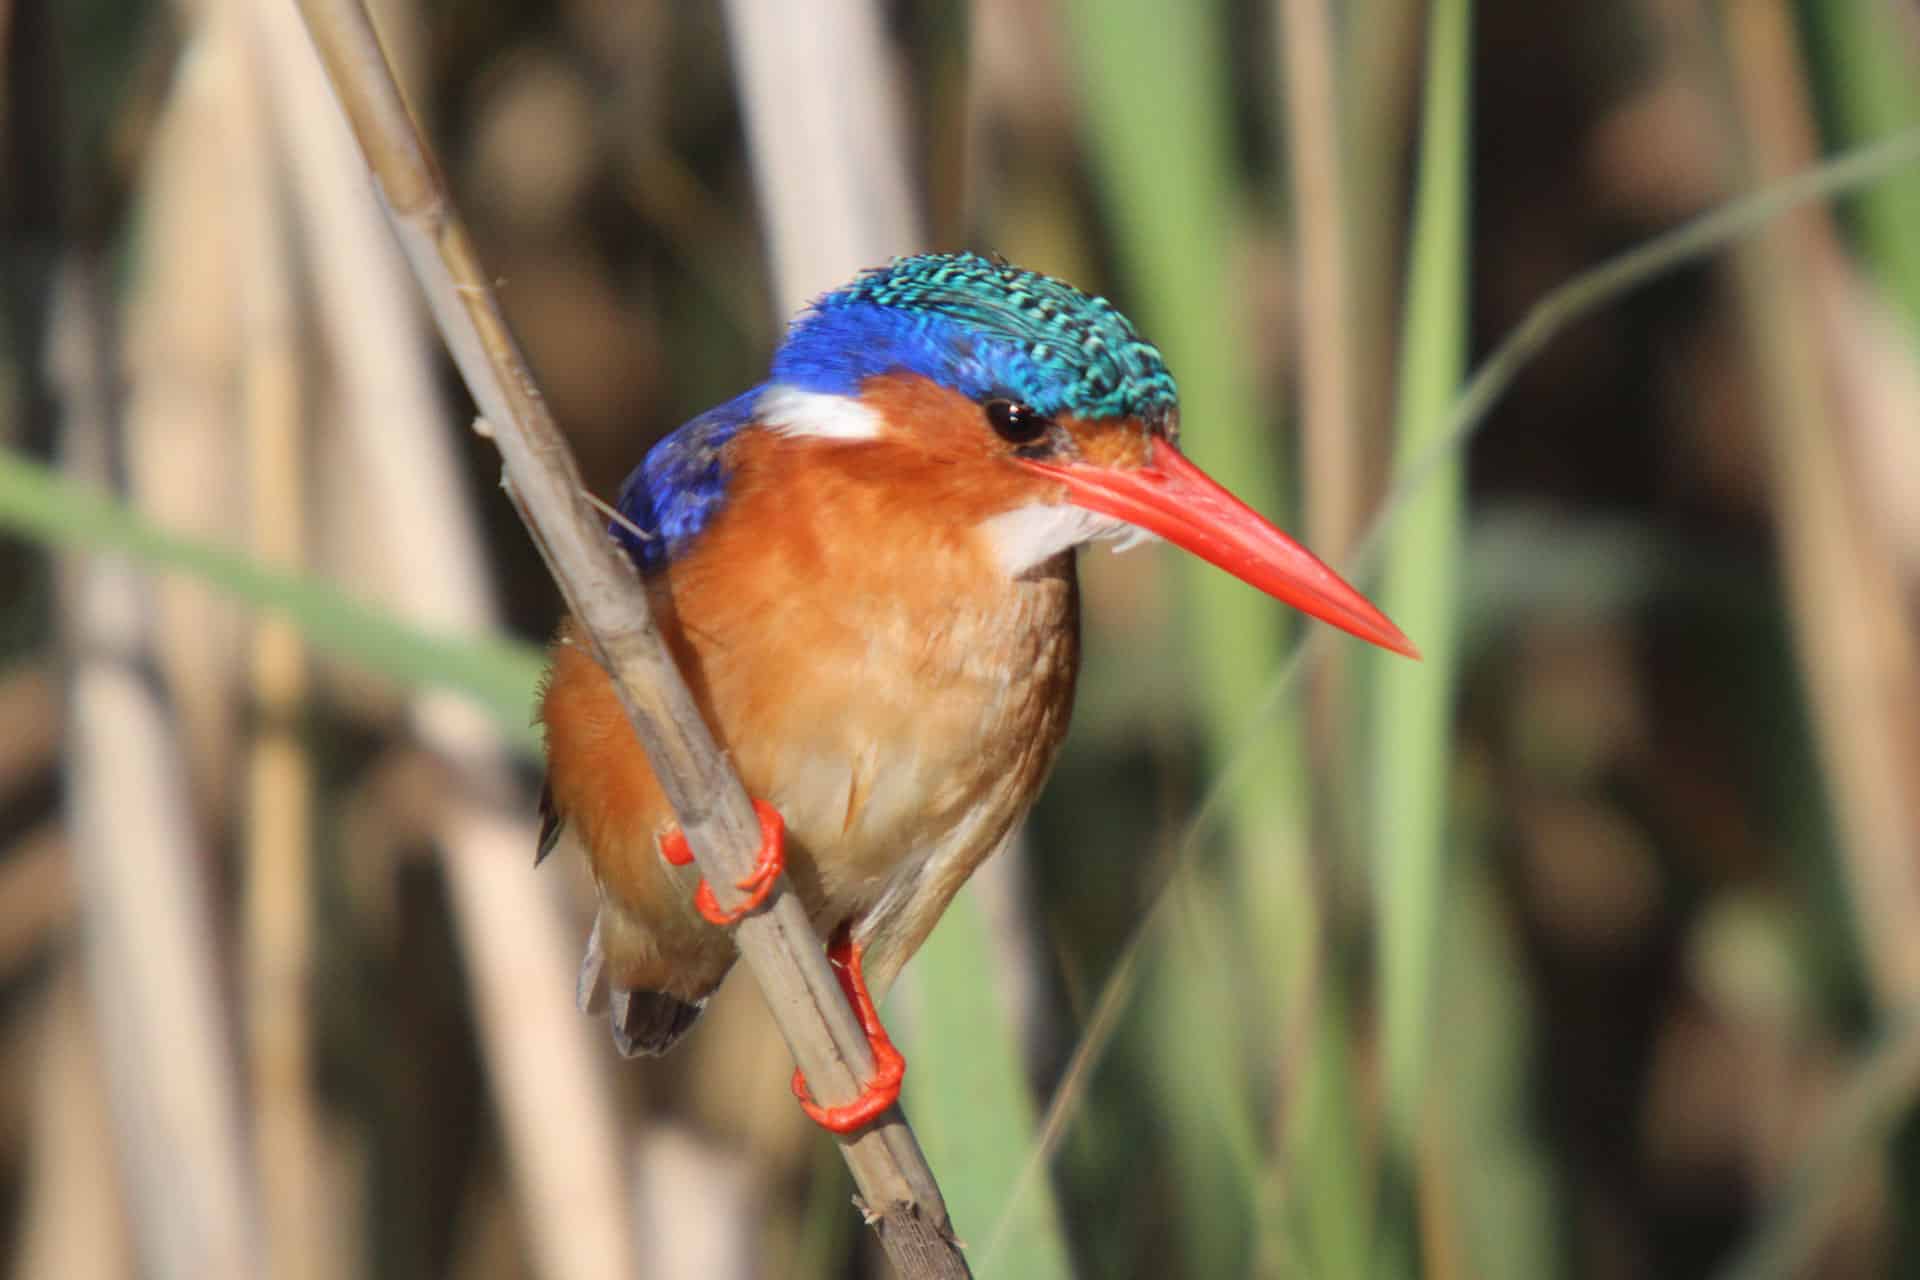 A malachite kingfisher bird perched on a reed in the Okavango Delta